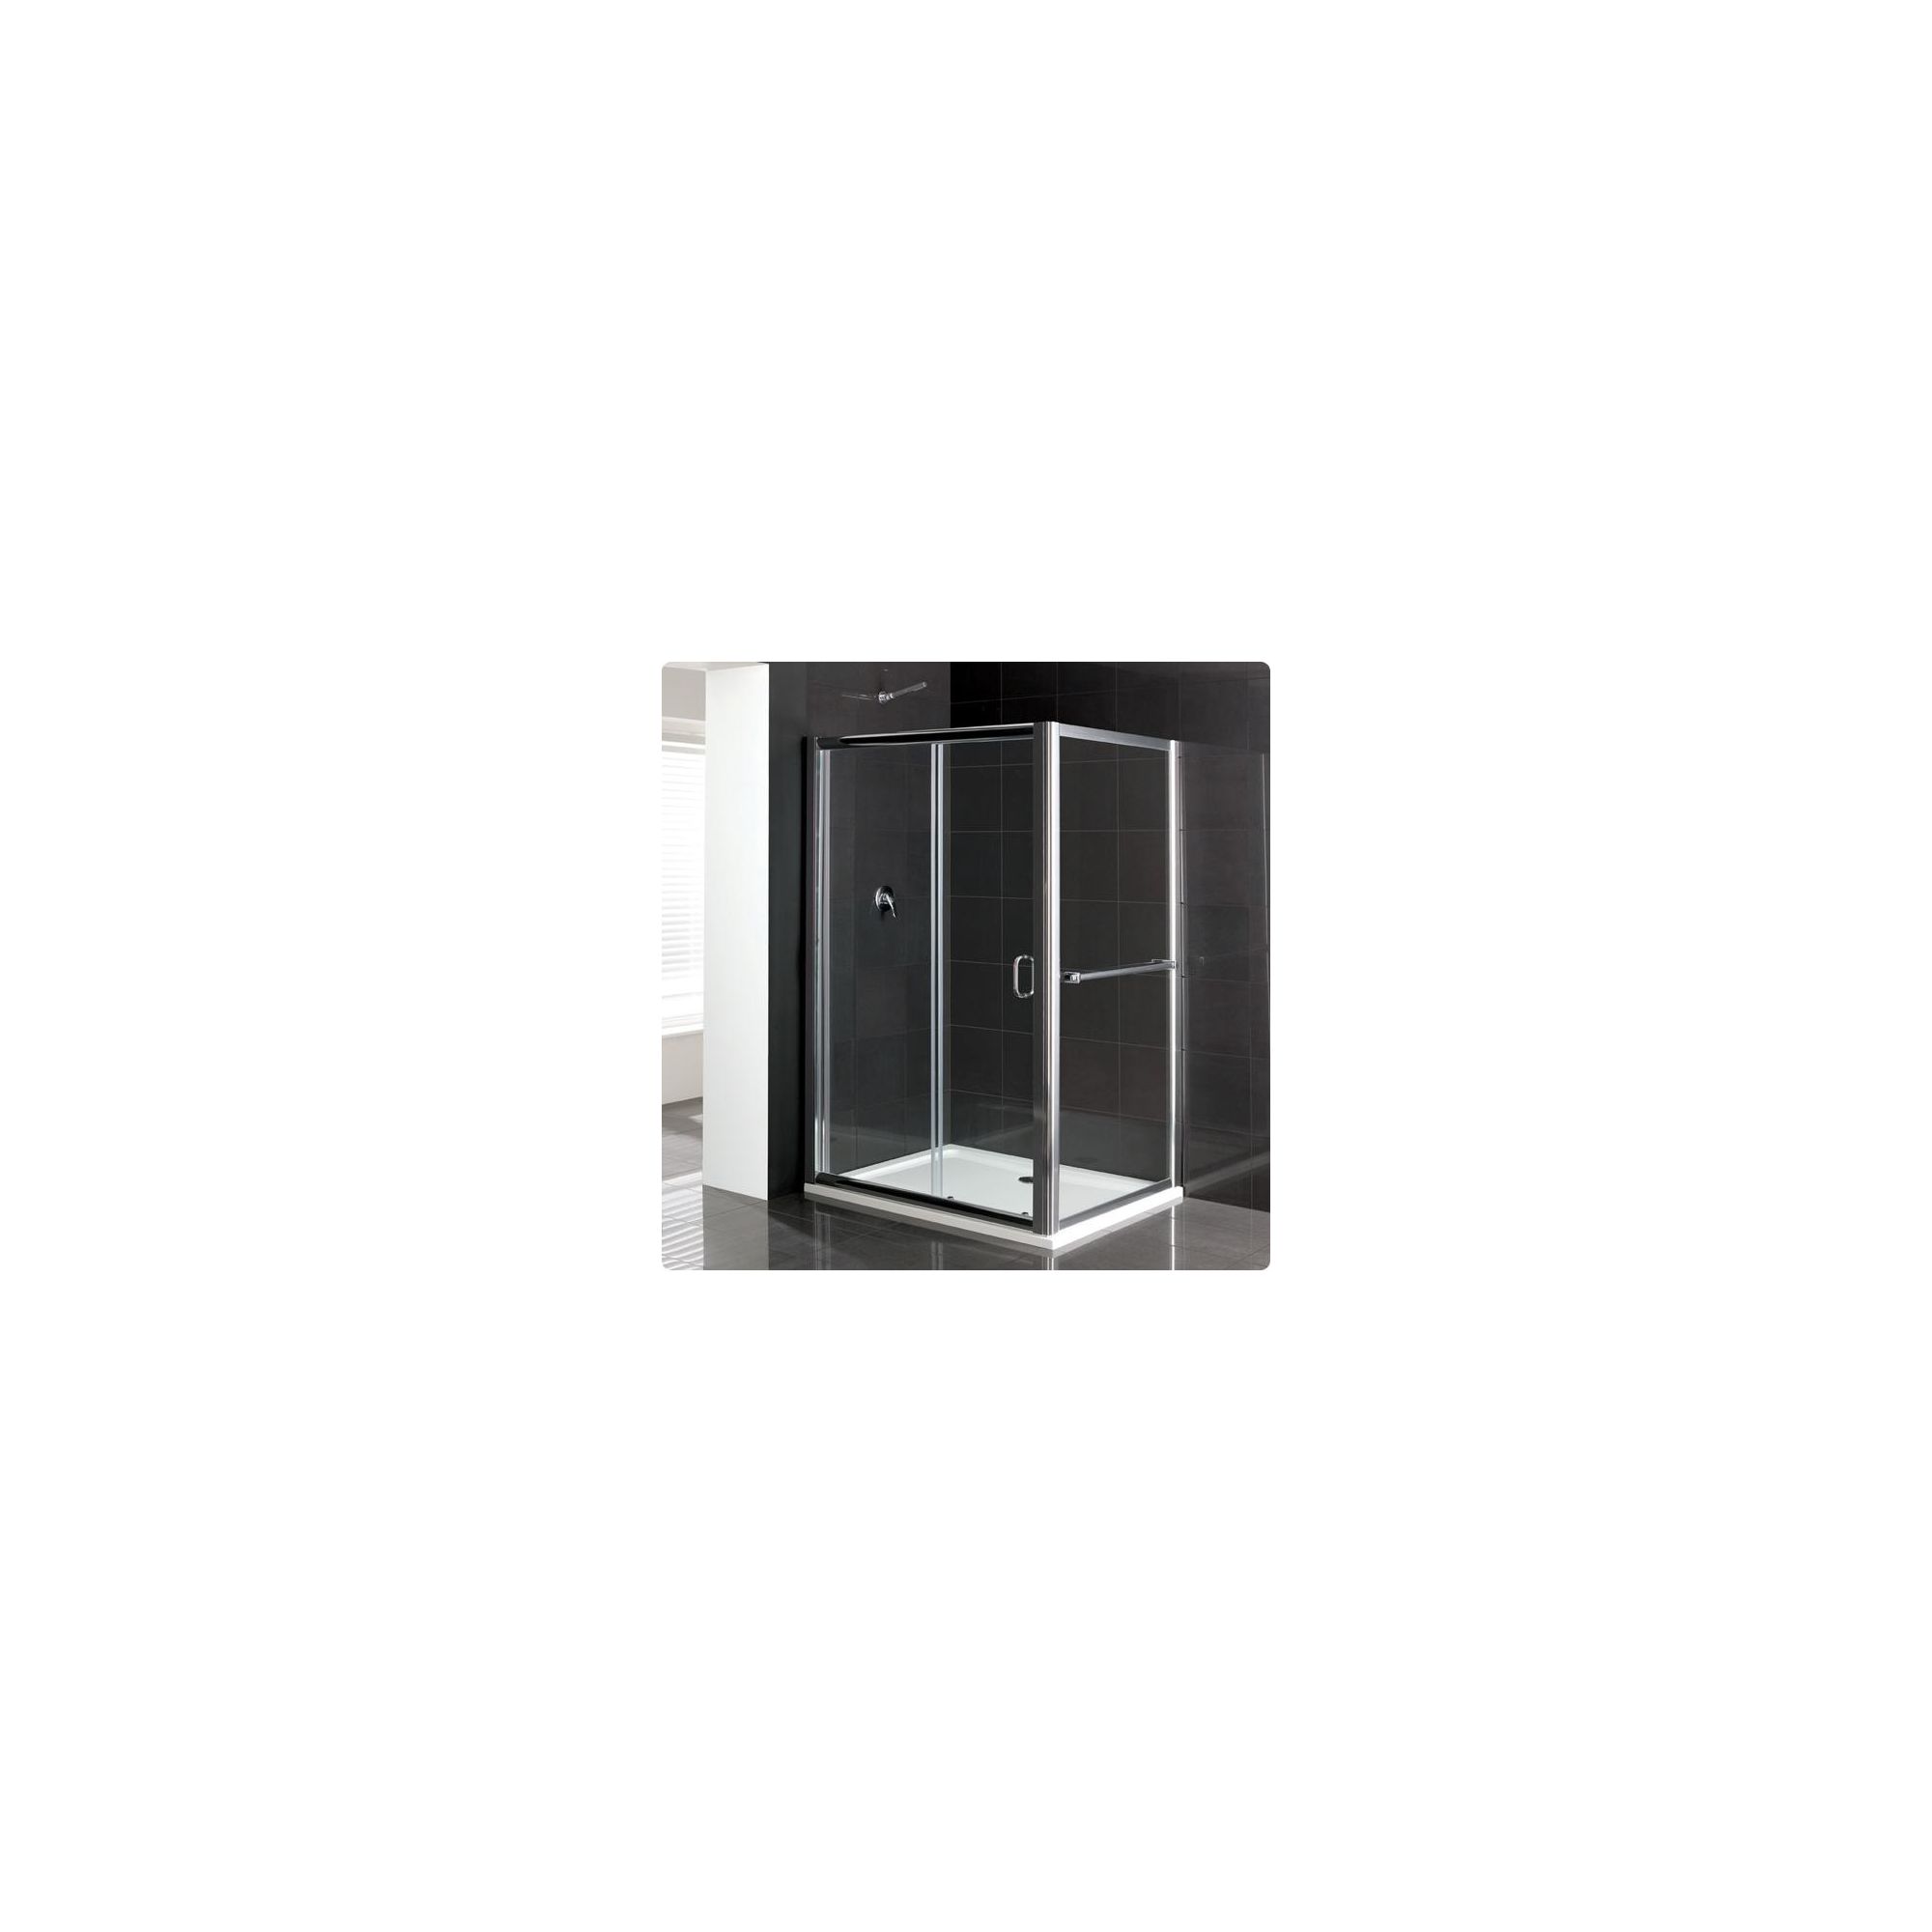 Duchy Elite Silver Sliding Door Shower Enclosure with Towel Rail, 1700mm x 760mm, Standard Tray, 6mm Glass at Tesco Direct